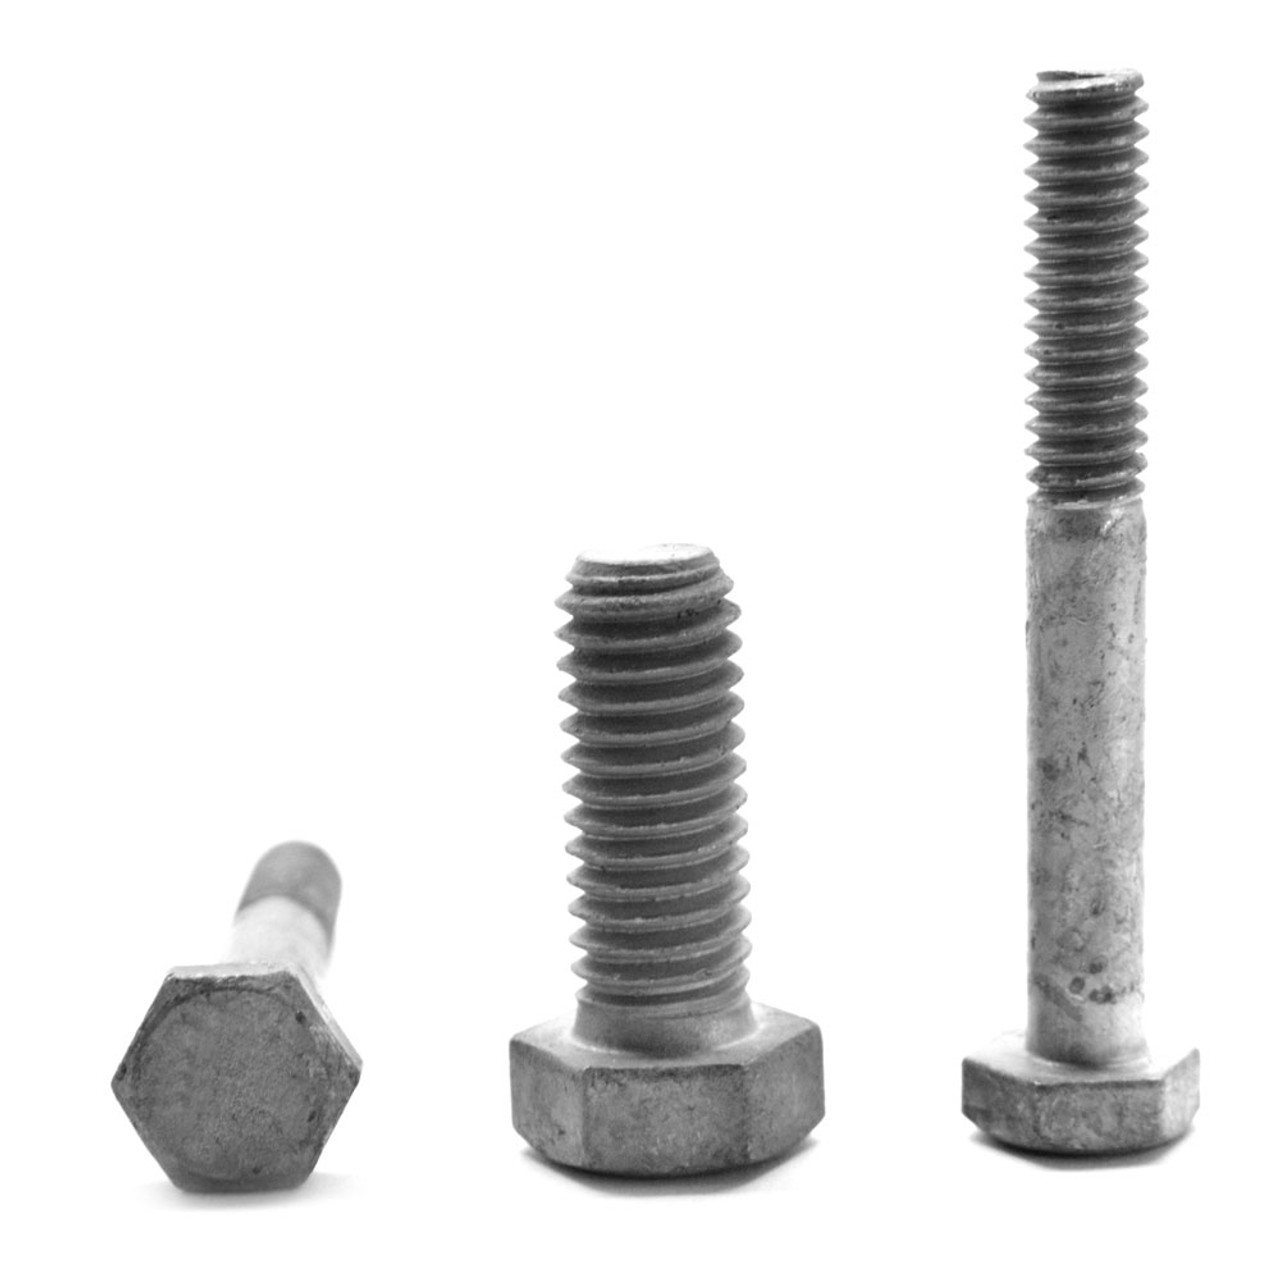 1/2"-13 x 20"6"THD UNDER-SIZED Coarse Thread A307 Grade A Hex Bolt Low Carbon Steel Hot Dip Galvanized